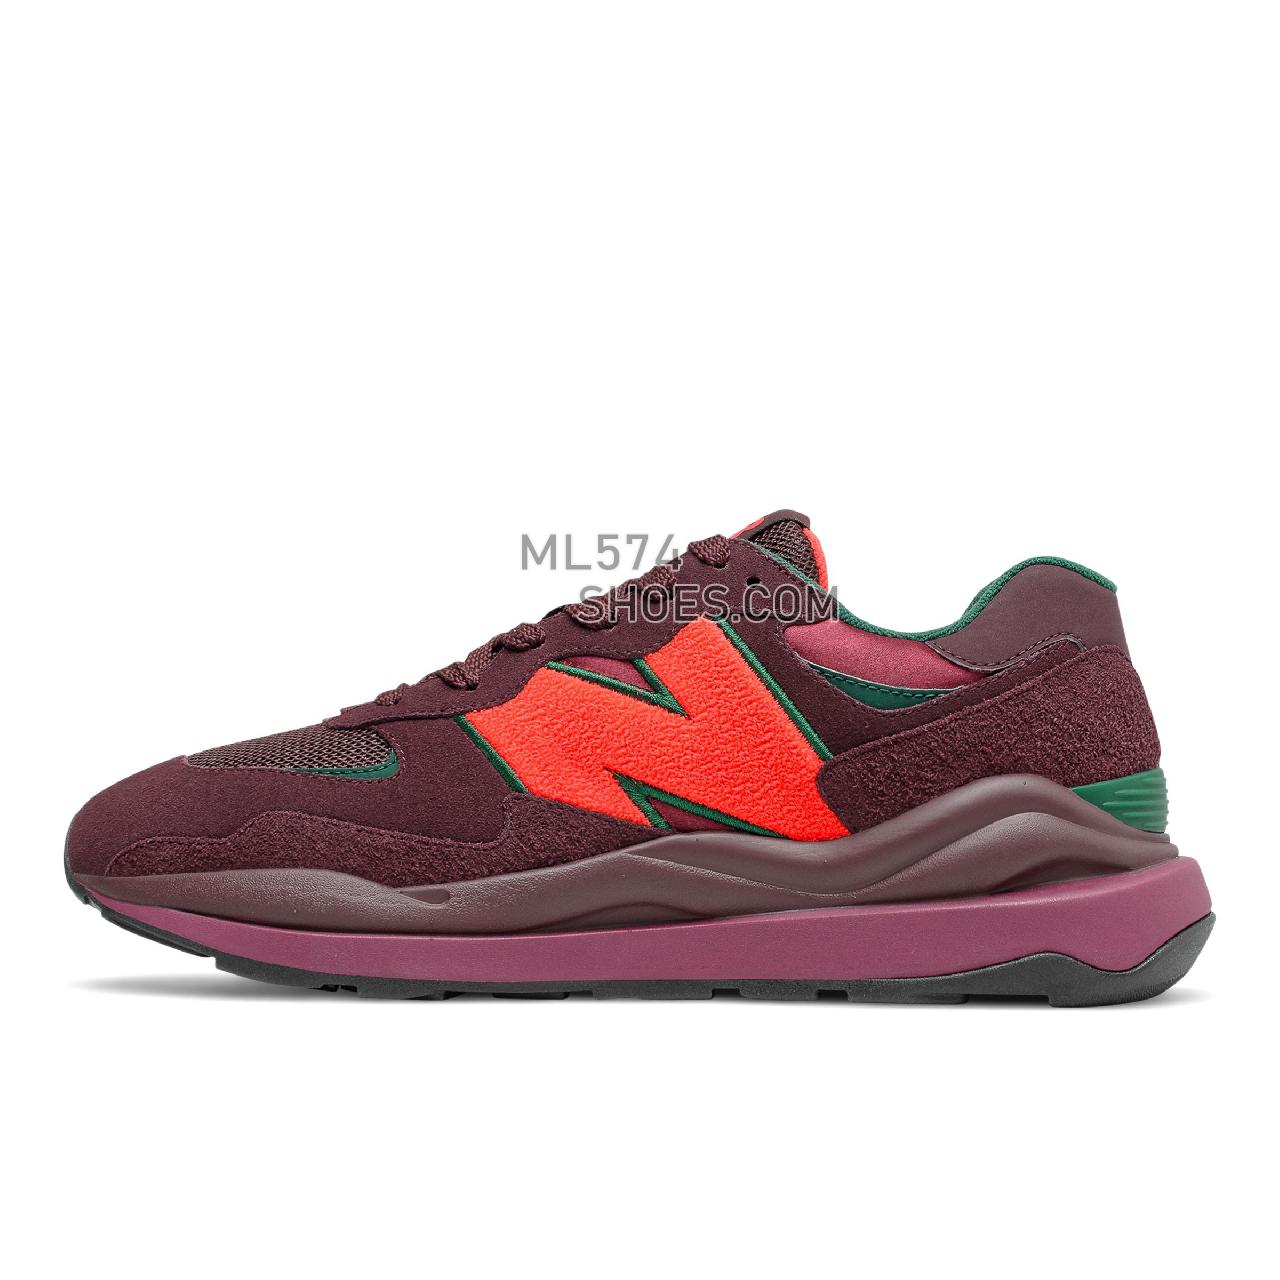 New Balance 57/40 - Men's Sport Style Sneakers - Henna with Neo Flame - M5740WA1